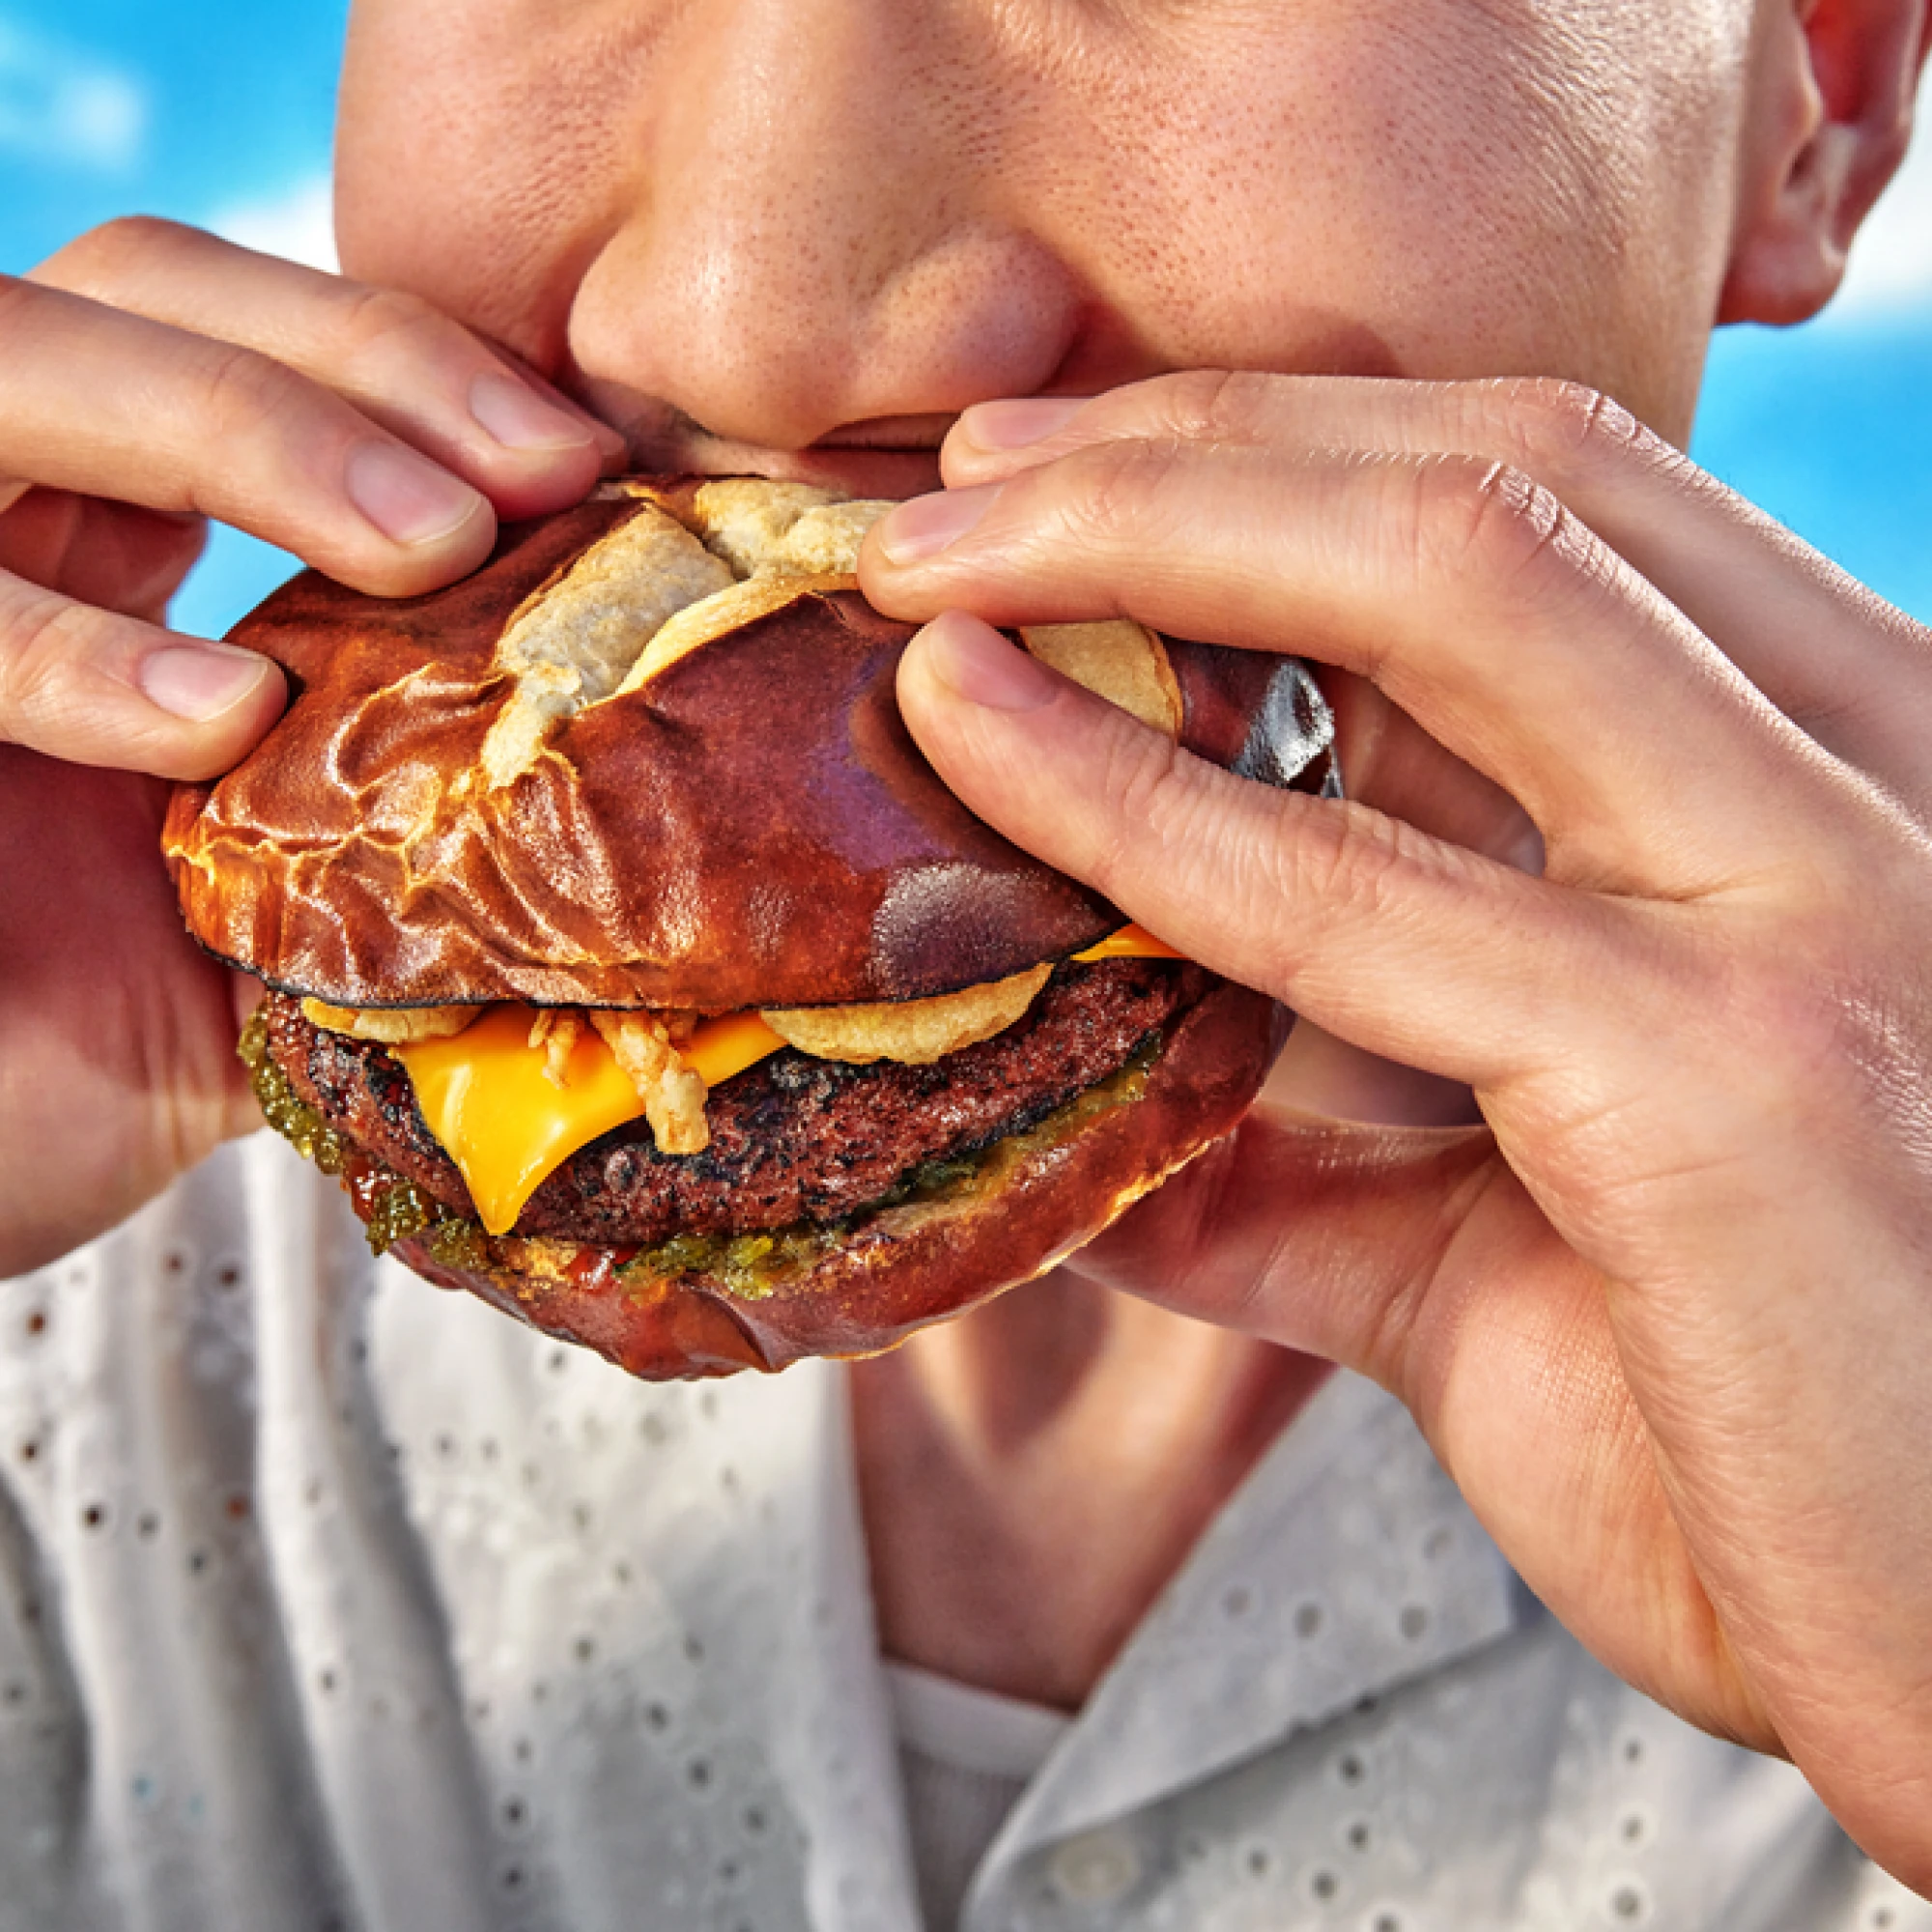 Person eating a burger with an Impossible Beef Patty